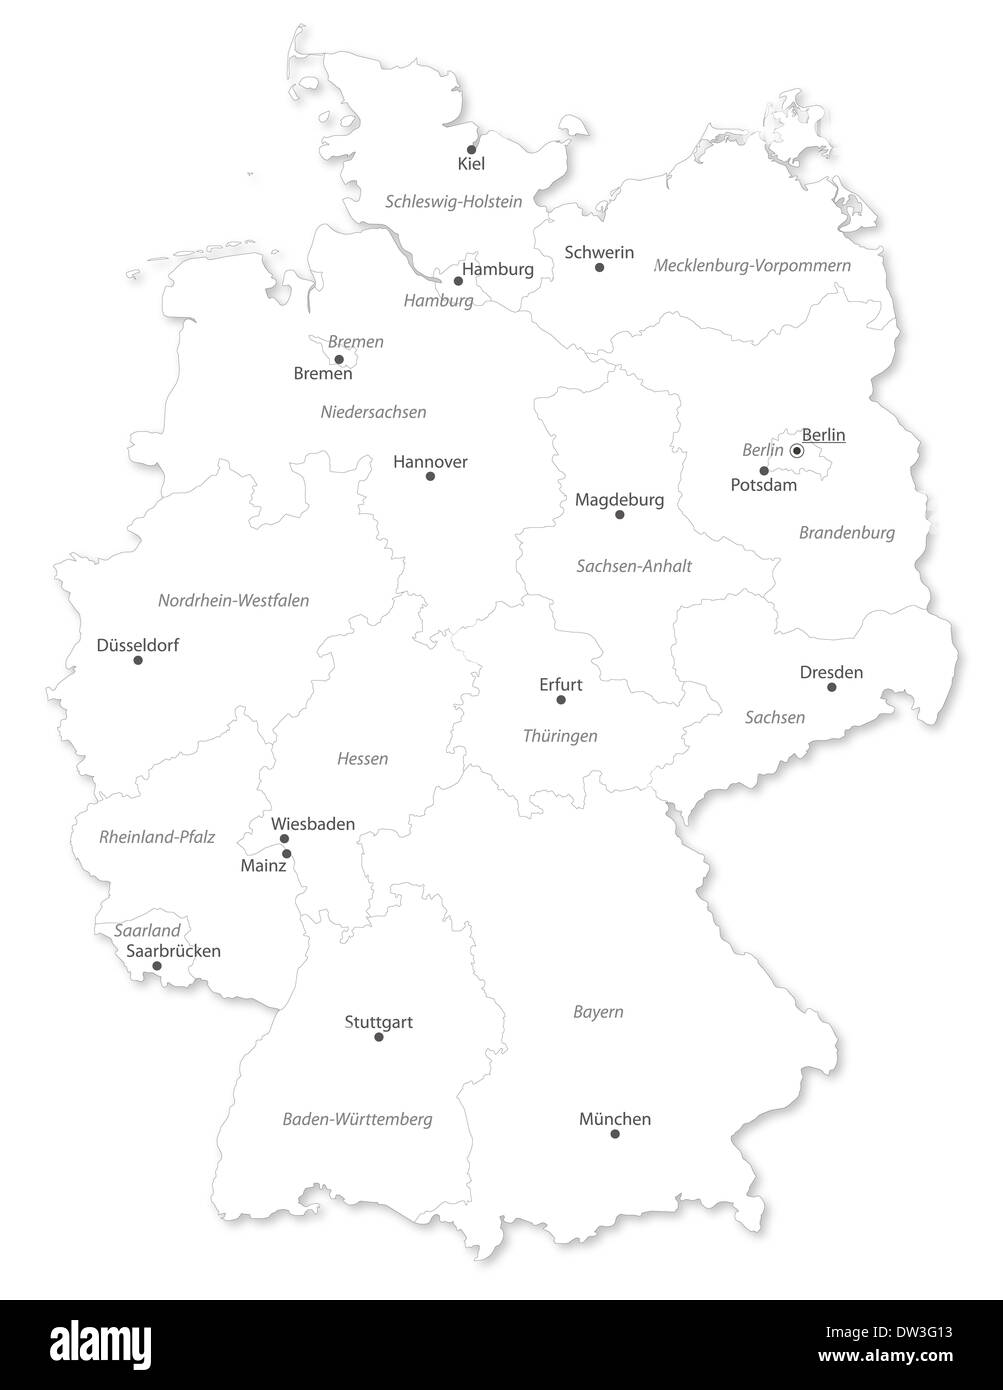 Map of German states with cites on white background. A small scale contour map of Germany projected in WGS 84 World Merca Stock Photo